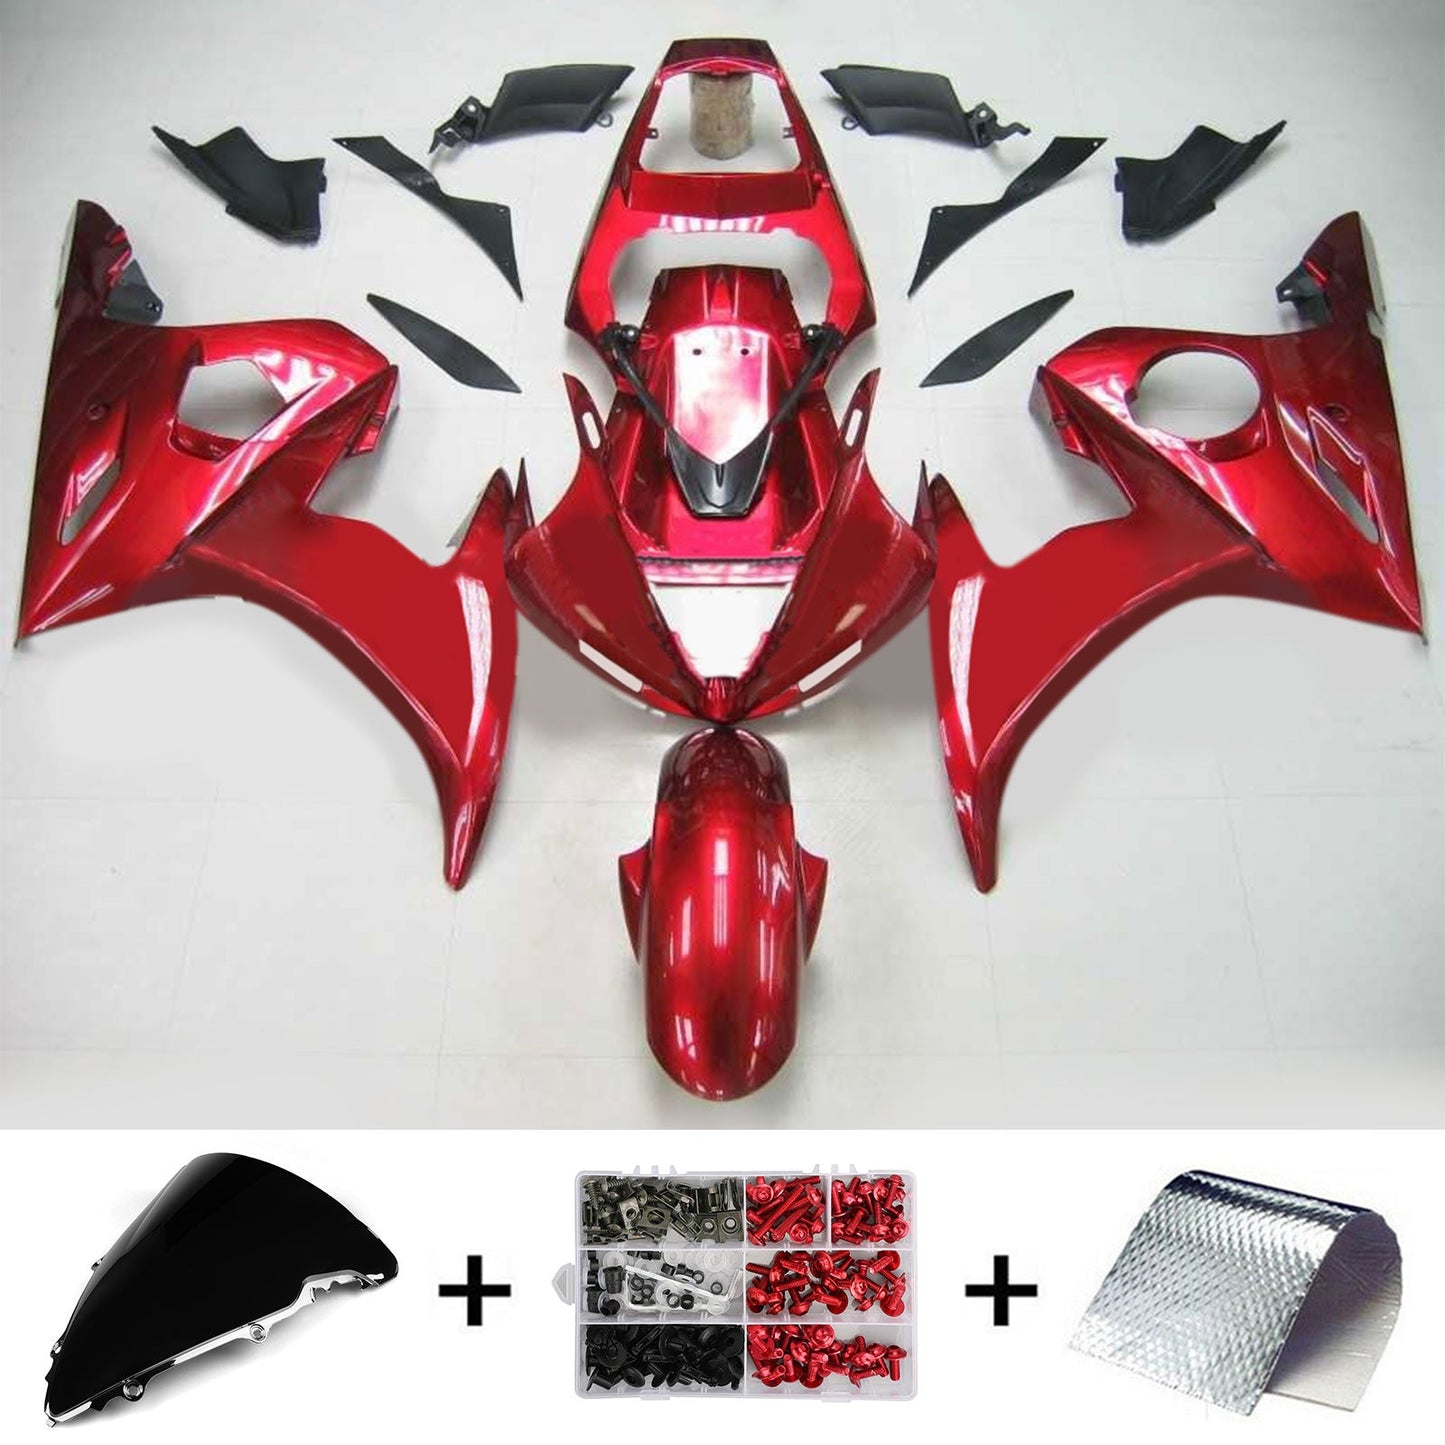 Amotopart Yamaha 2005 YZF 600 R6 Gloss Red Fearing Kit